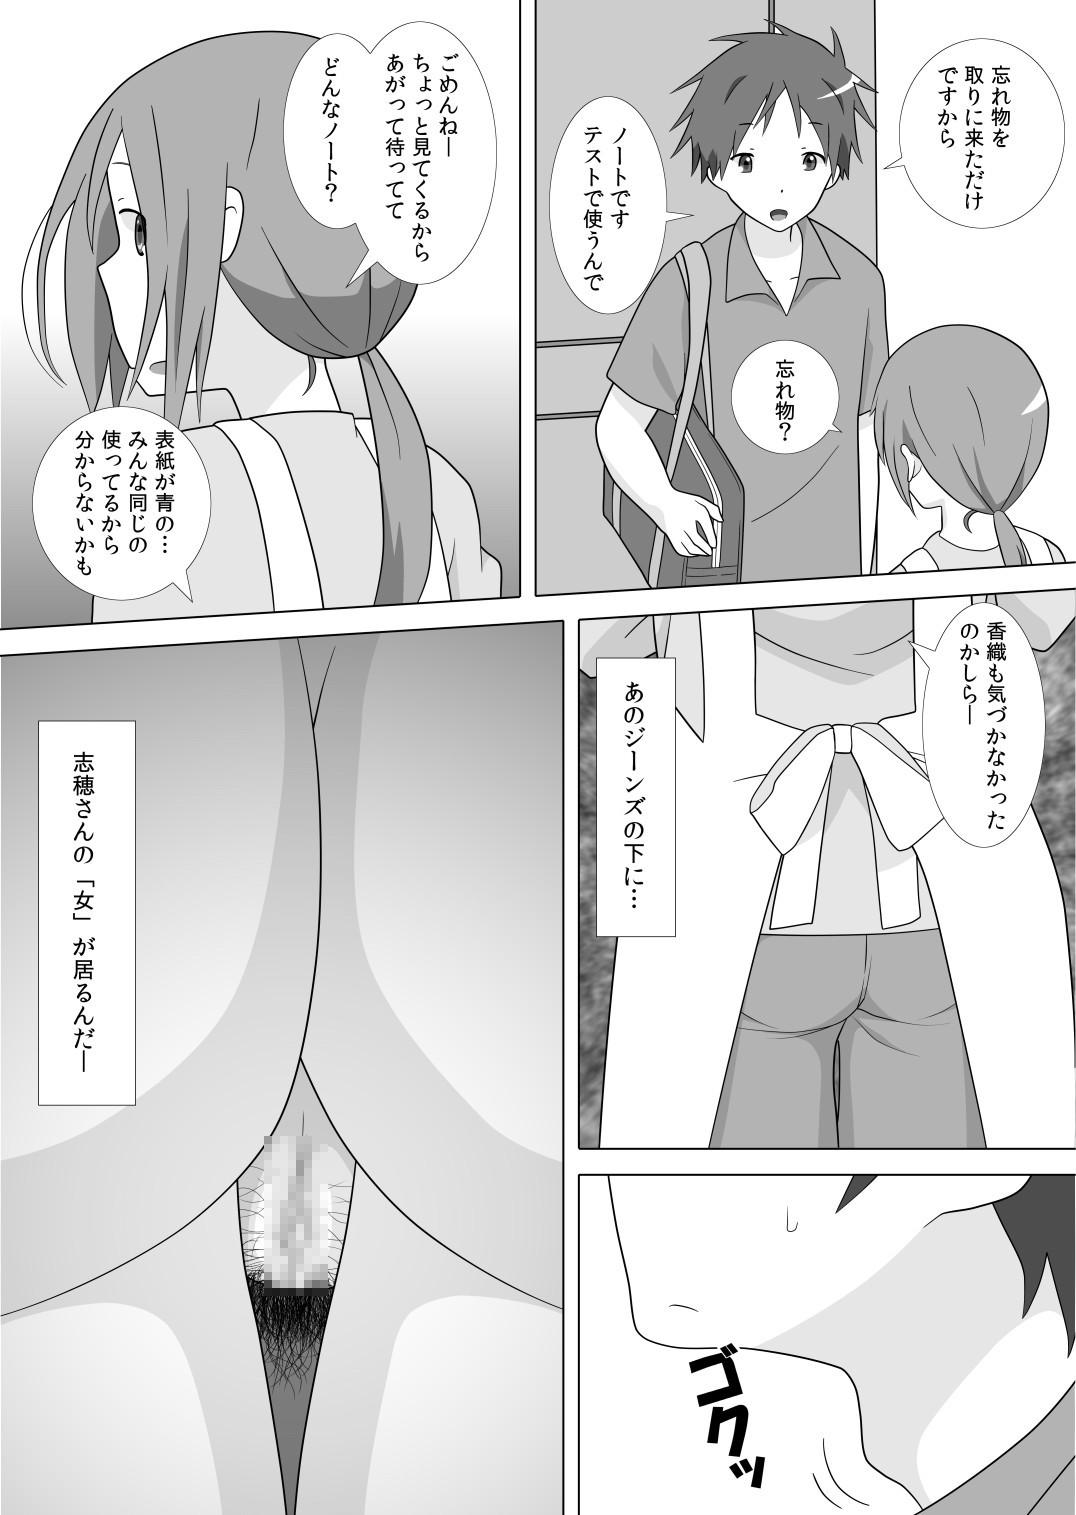 Por さぁこれから Episode: 1 - One week friends Stepbrother - Page 5